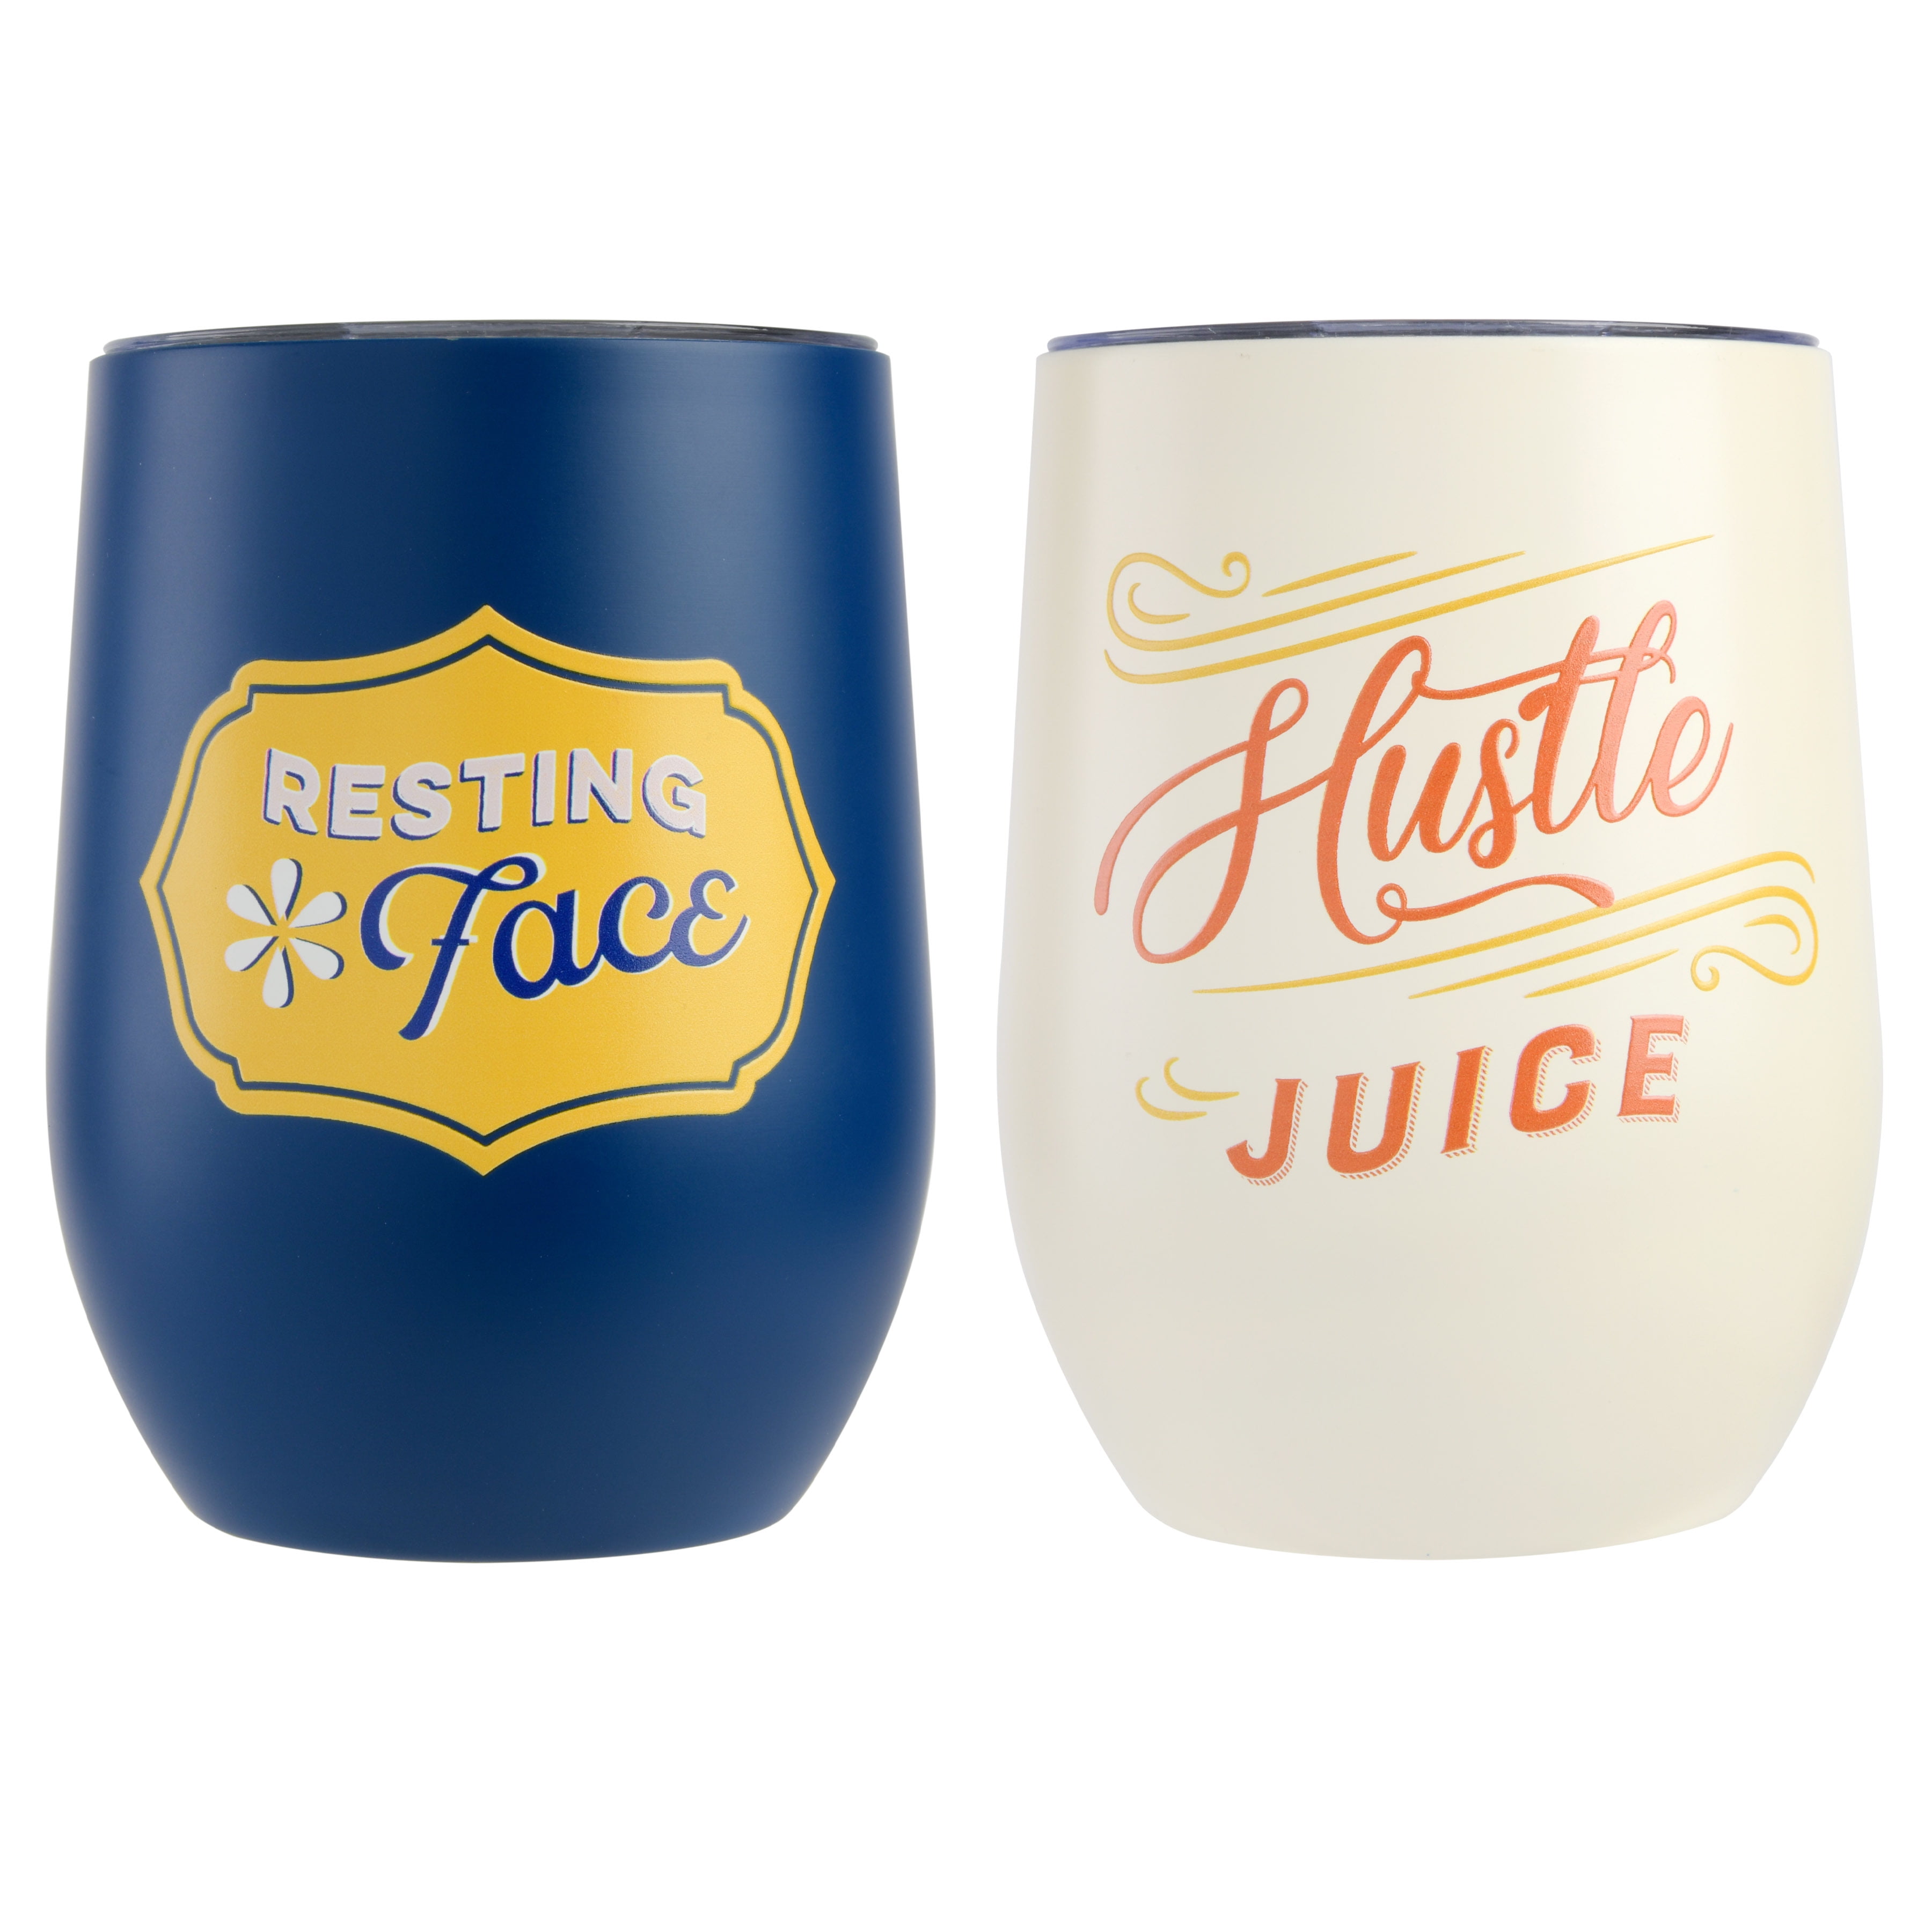 Wanda June Home Saucy Sippers White & Blue 12-ounce Stainless Steel Stemless Wine Glasses with Lid, Set of 2  by Miranda Lambert